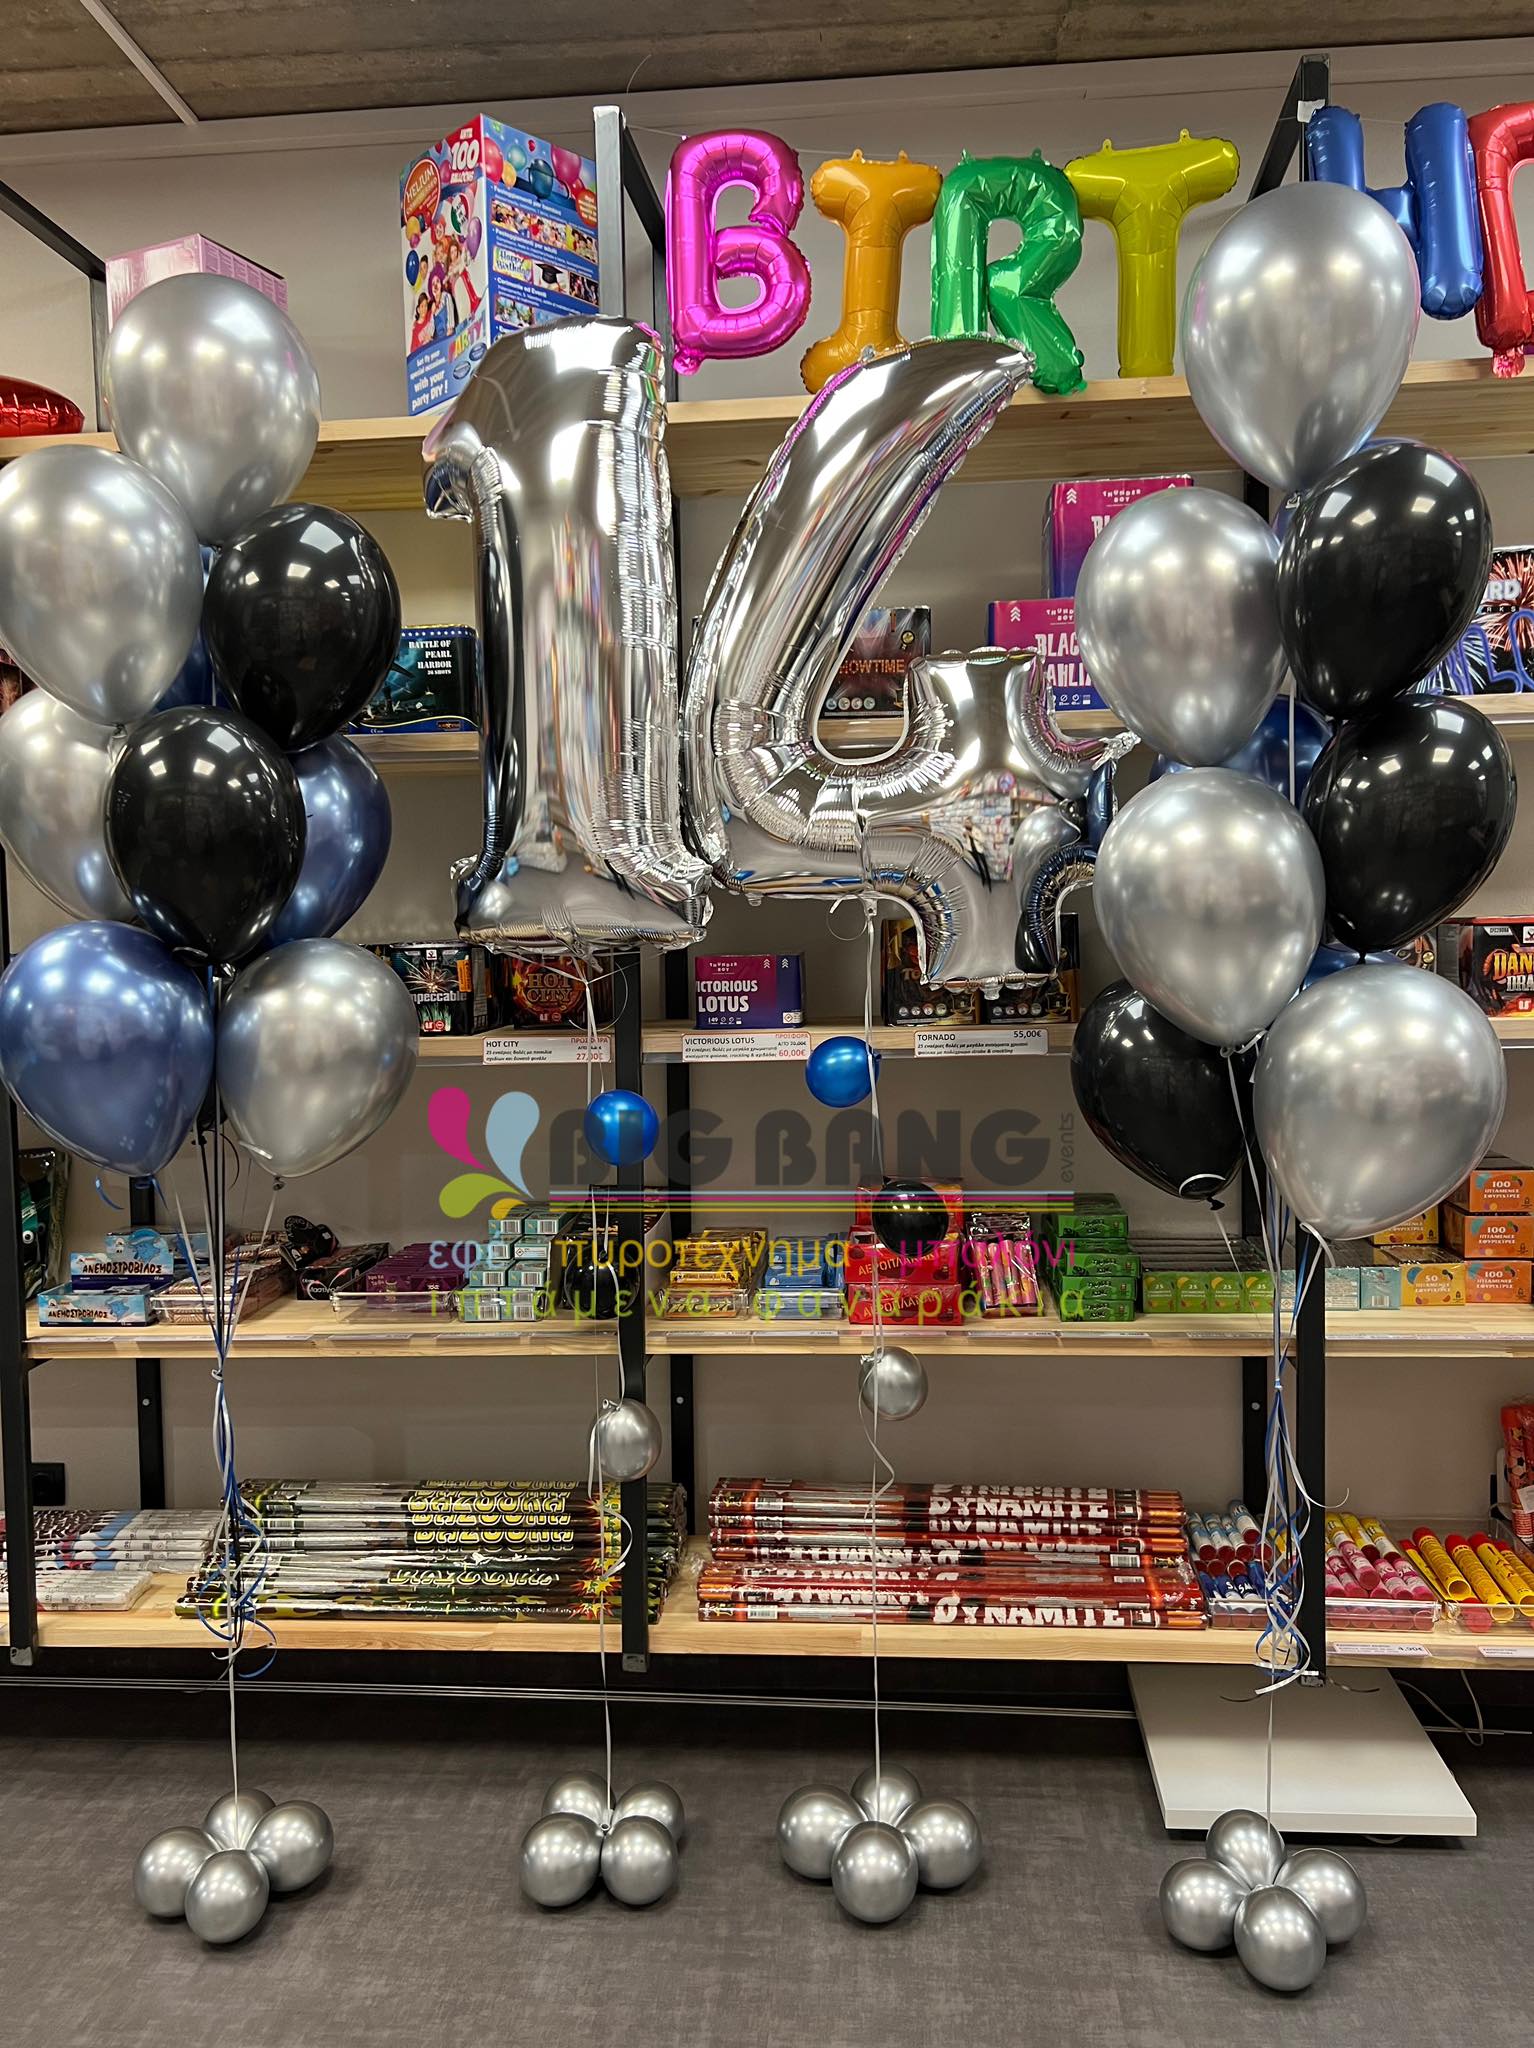 14th balloons foil numbers